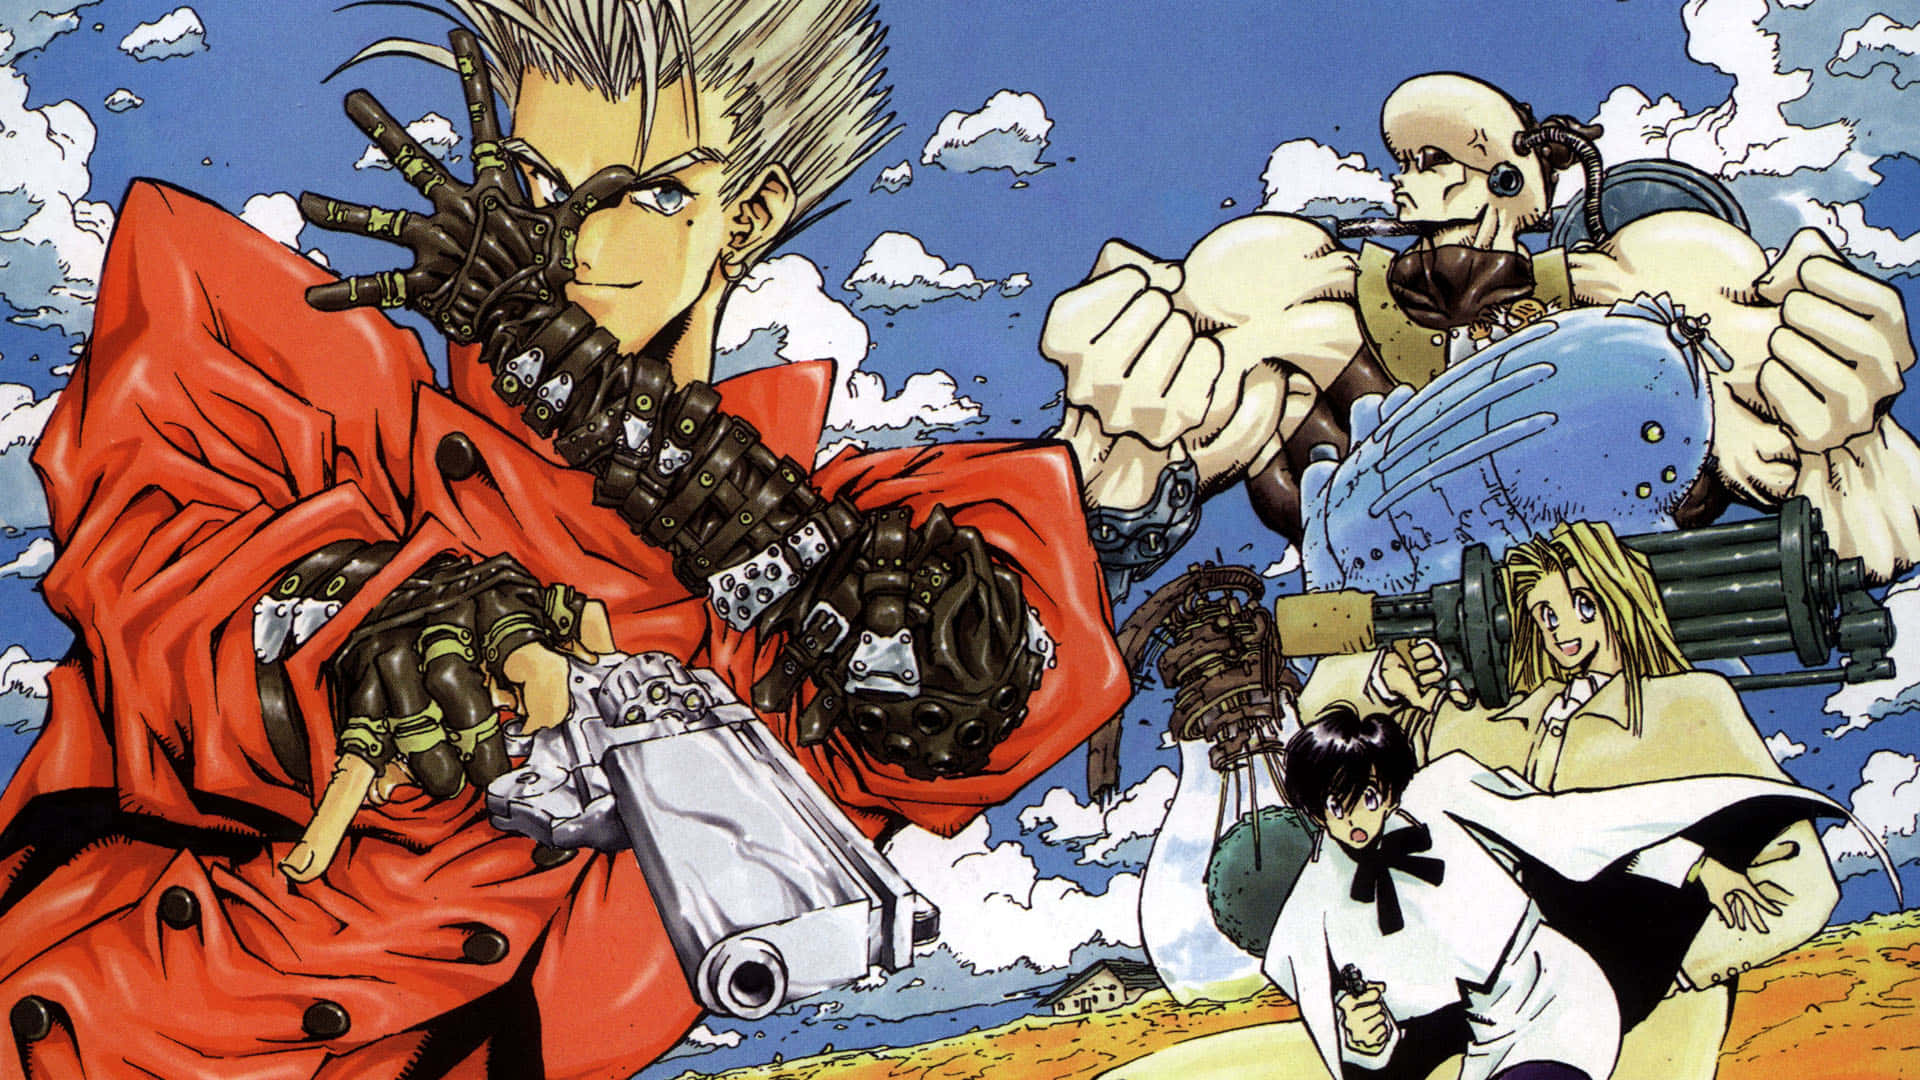 "Vash the Stampede - Taking Down the Bad Guys"